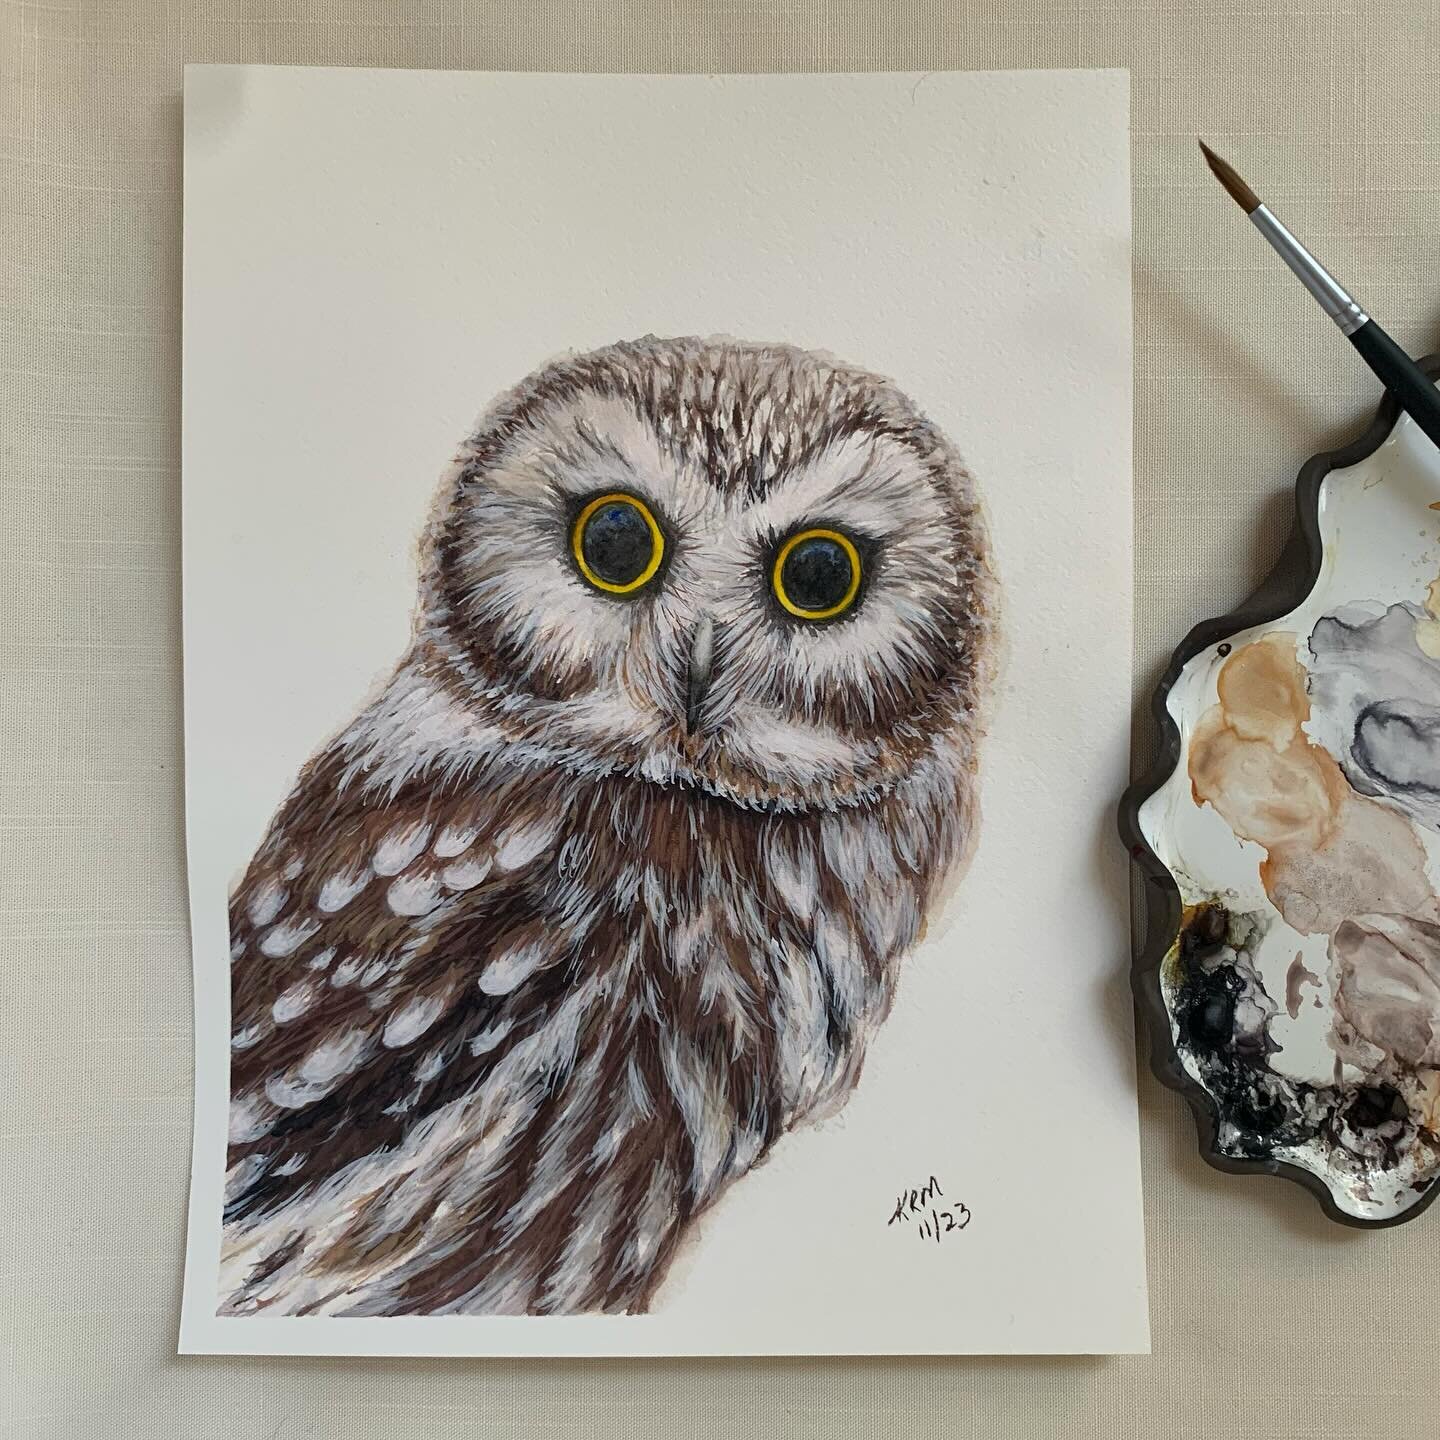 Finished painting of a Saw-Whet Owl.
#owl #owls #owllover #sawwhetowl #painting #watercolor #originalartwork #birdlovers #birdsofinstagram #willowglenstationery